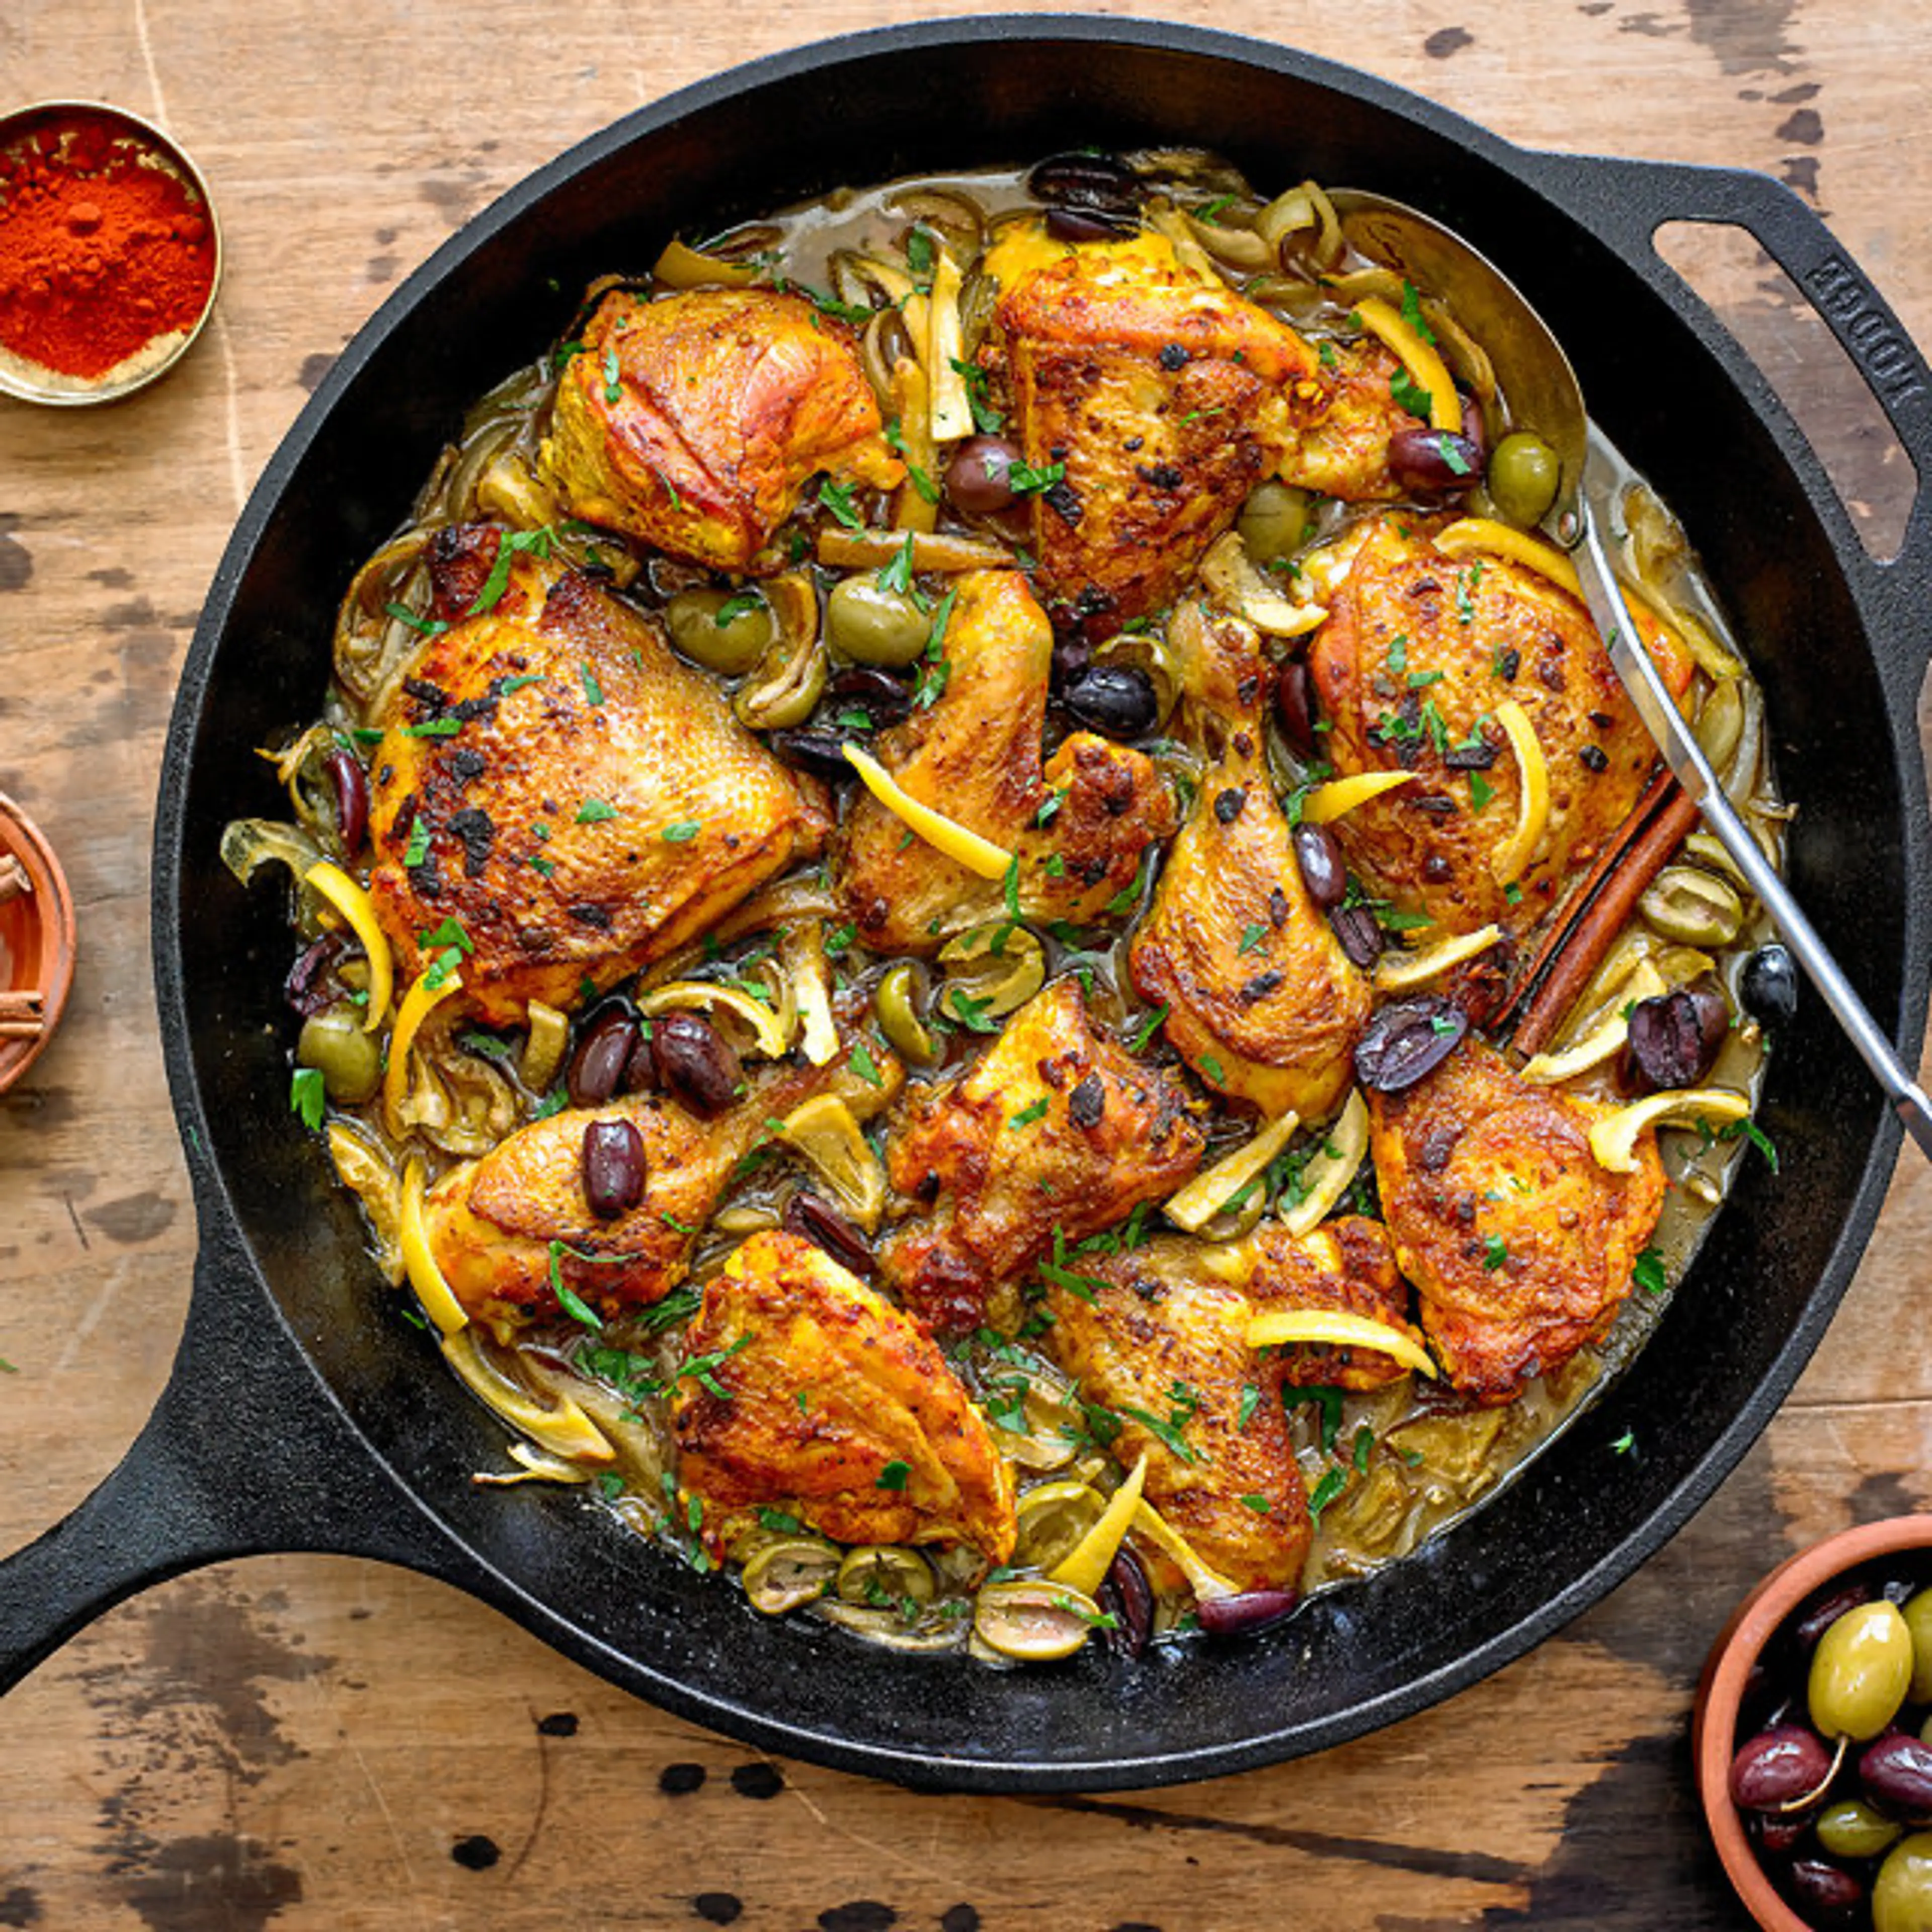 Chicken Tagine With Olives and Preserved Lemons